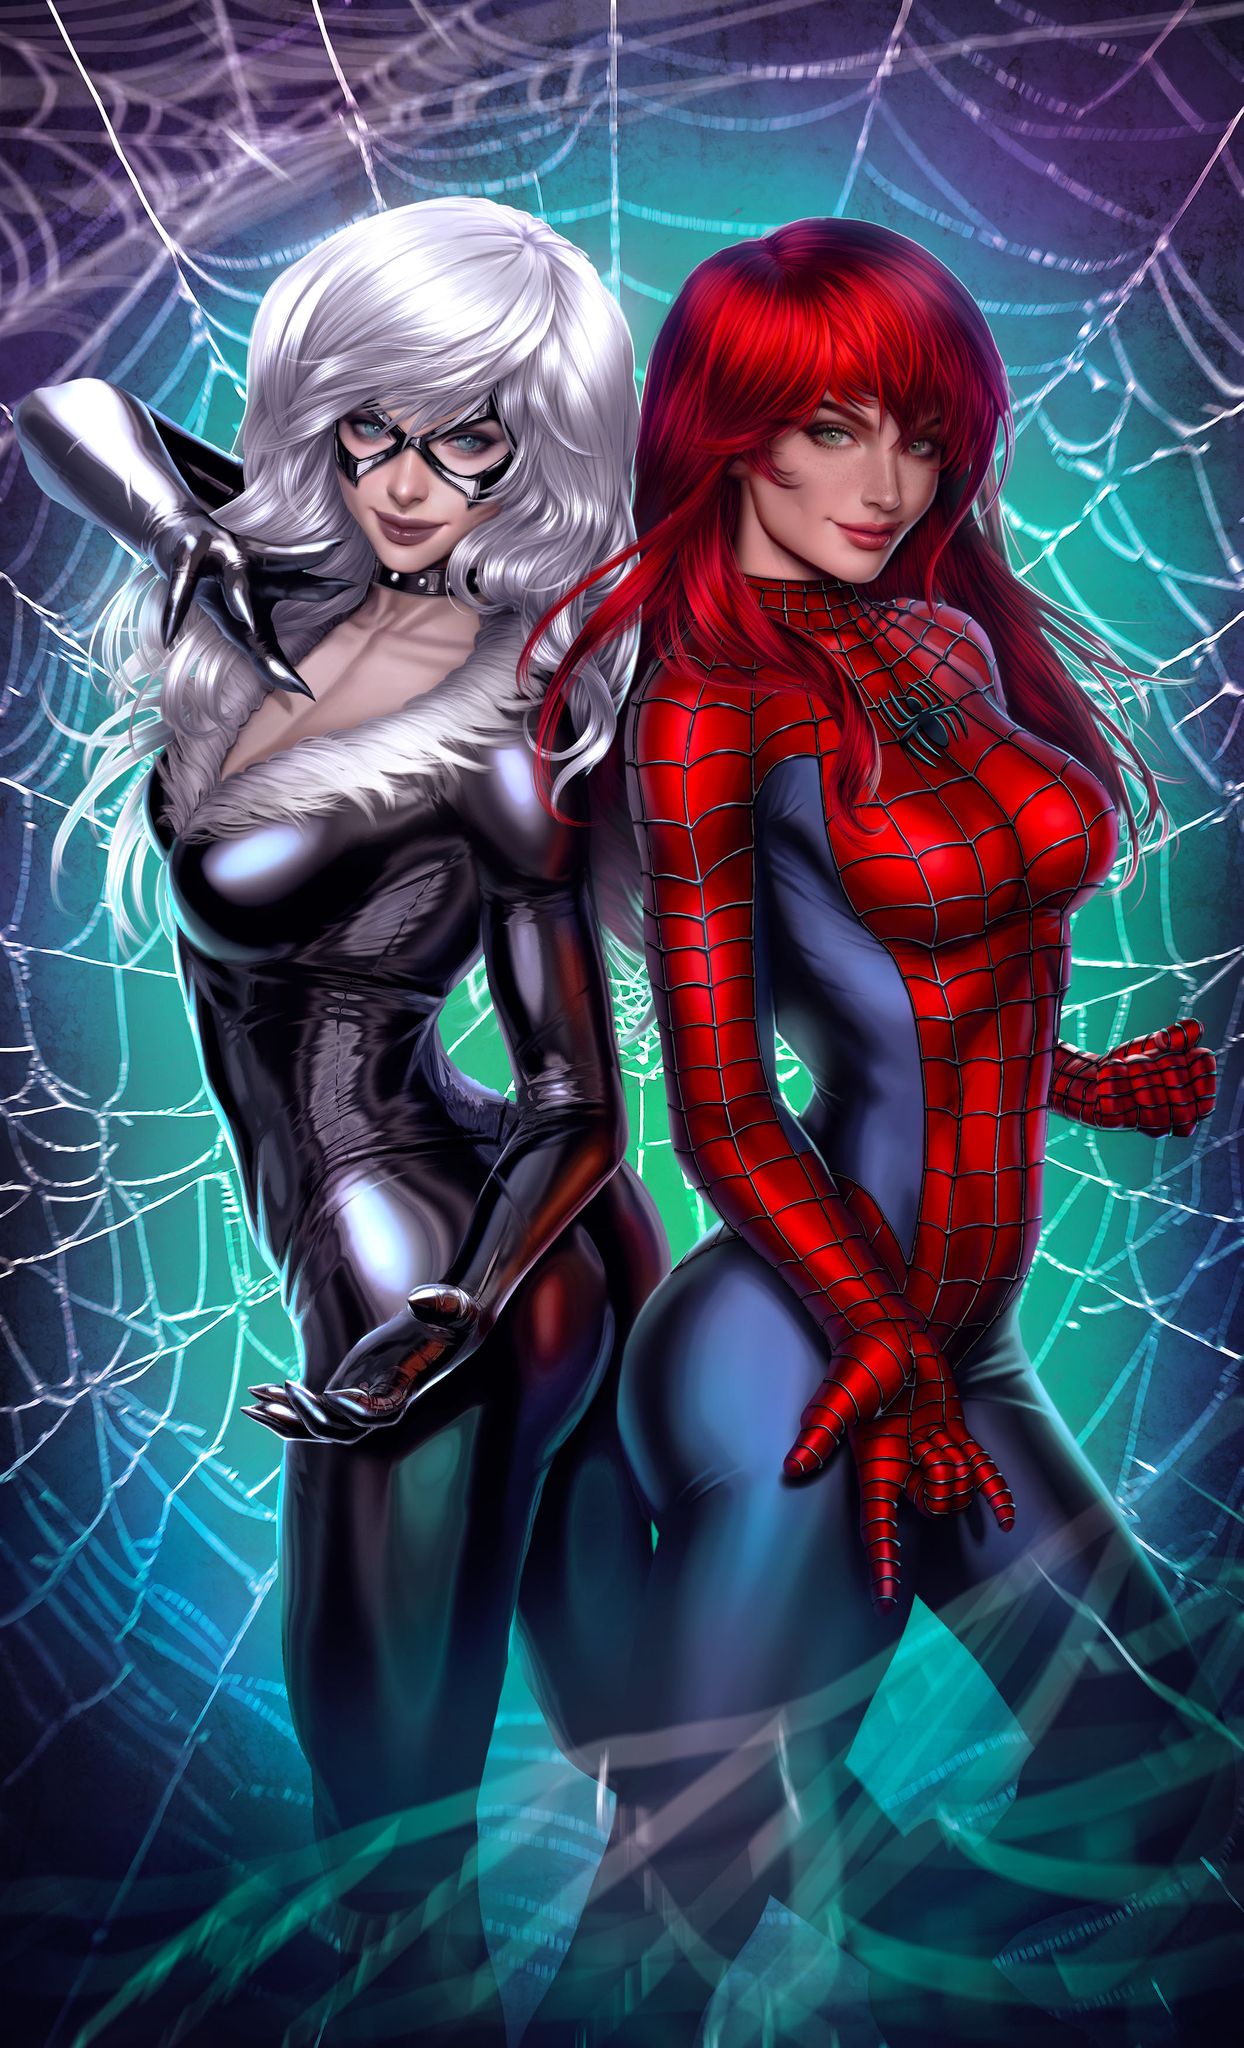 AMAZING SPIDER-MAN #20 ARIEL DIAZ FIRST EVER MARVEL EXCLUSIVE VARIANT COVERS